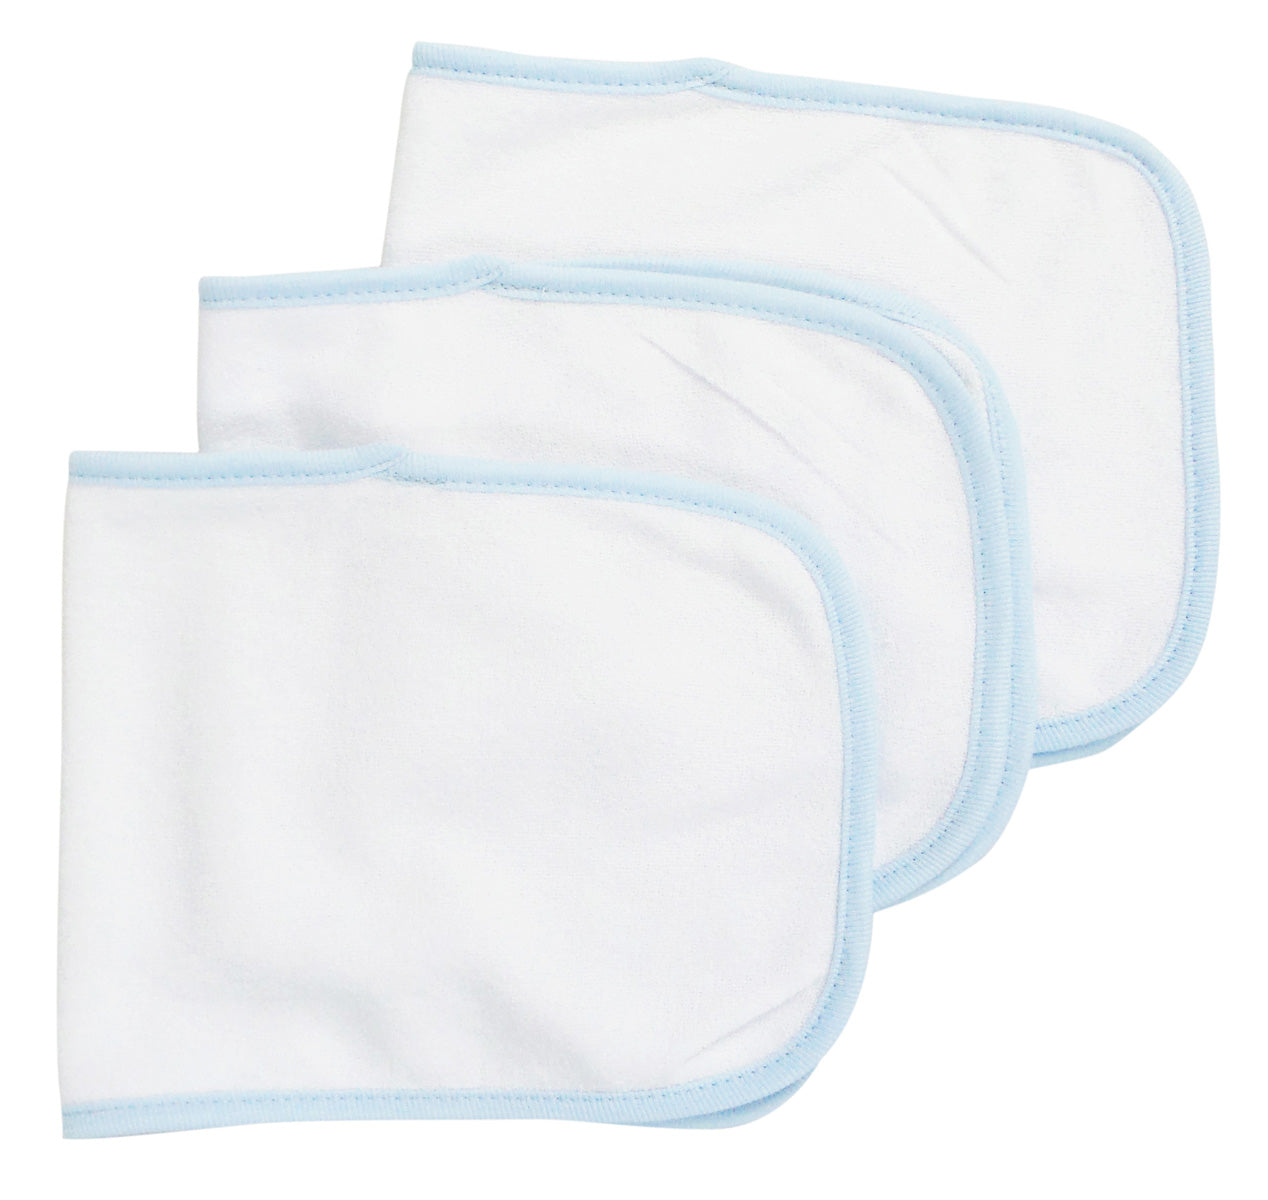 Baby Burpcloth With Blue Trim (Pack of 3) Blue.1025.3.Pack